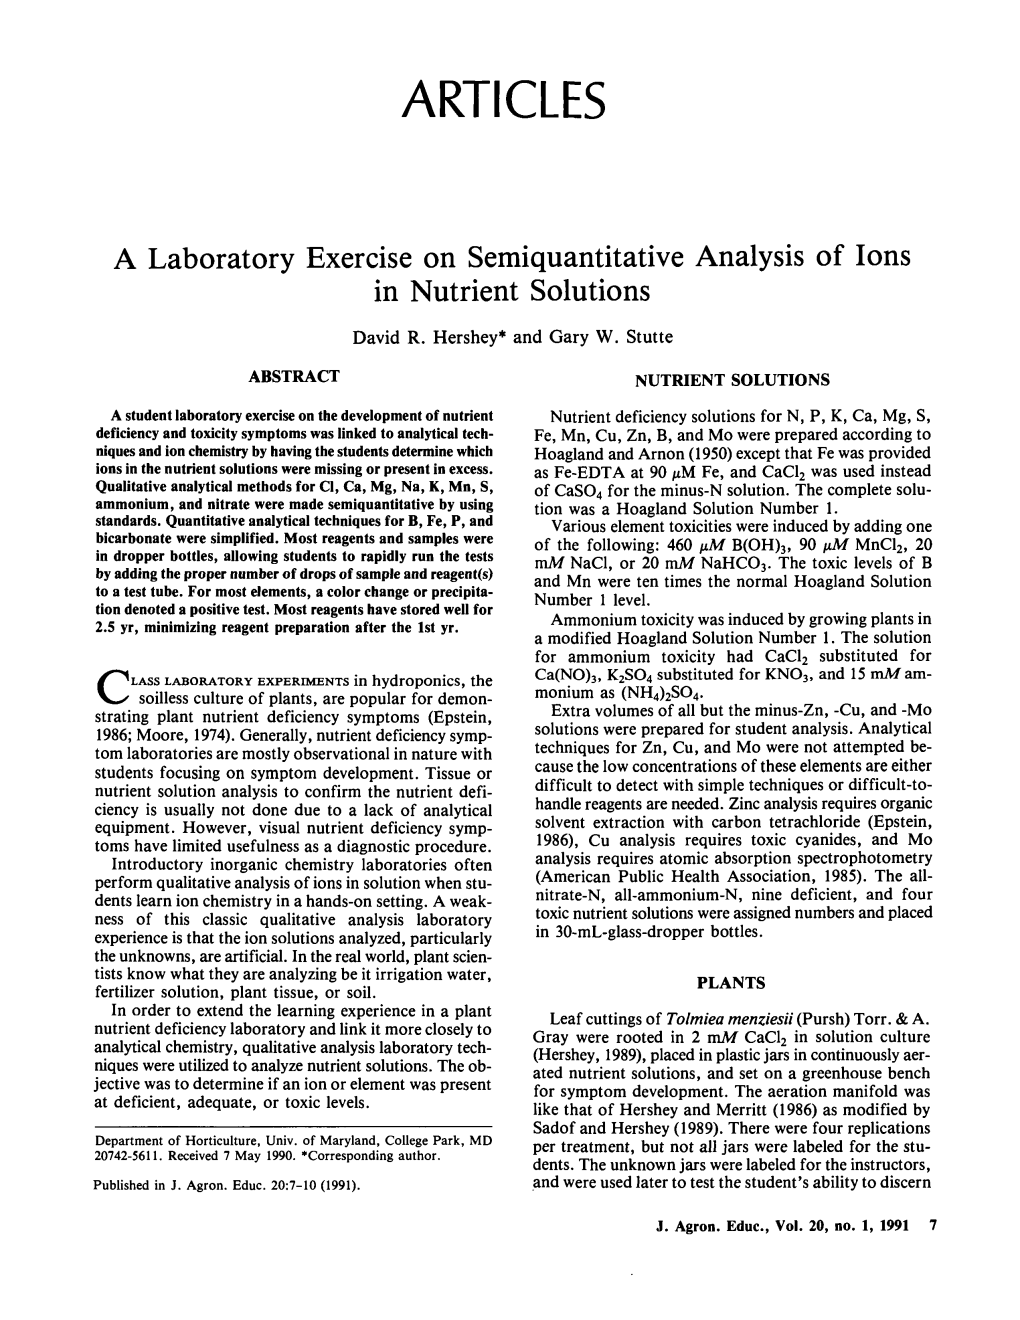 (1991) Laboratory Exercise on Semiquantitative Analysis of Ions In